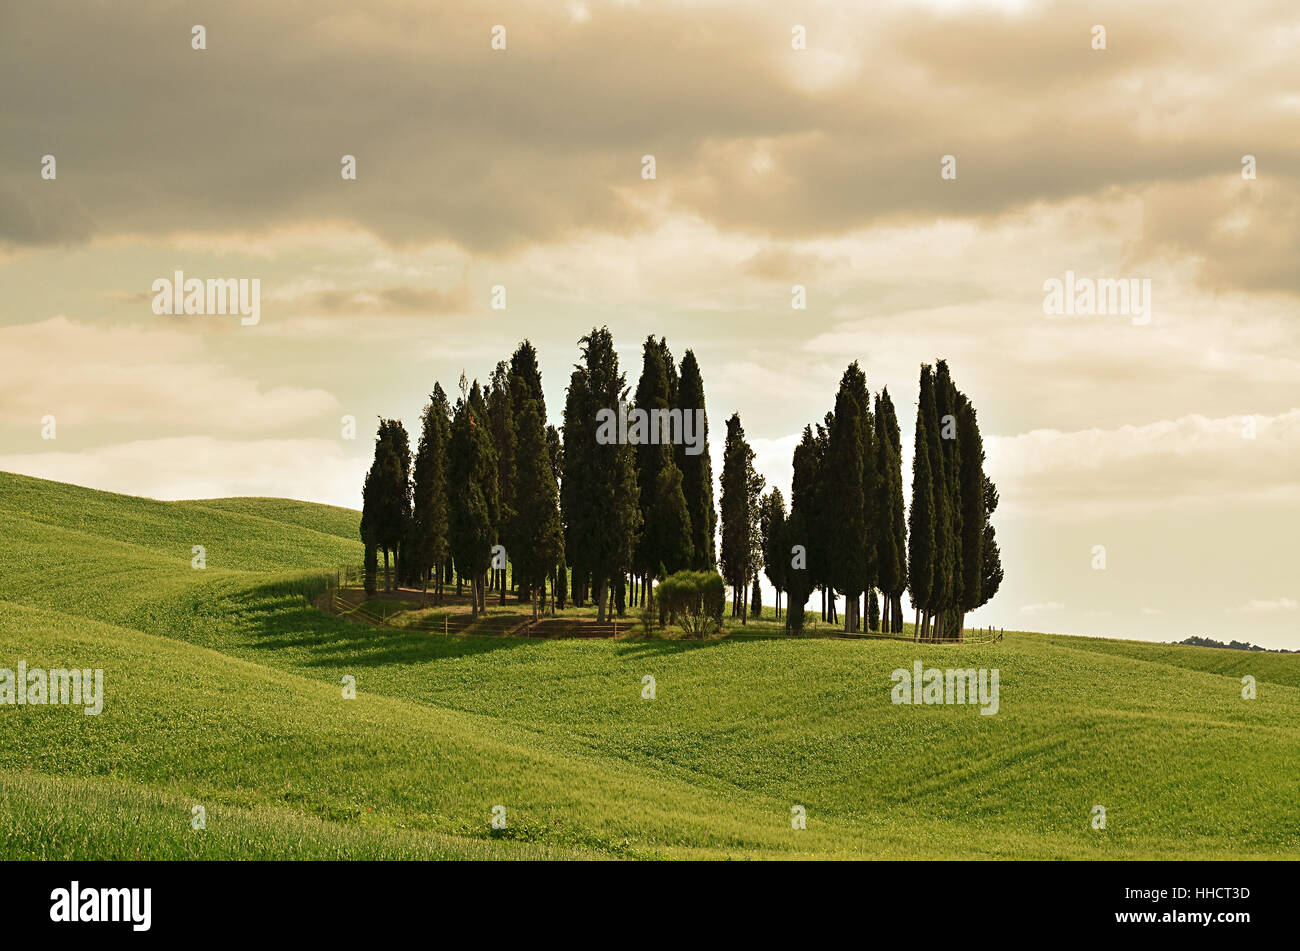 cypress group - val d oricia - tuscany Stock Photo